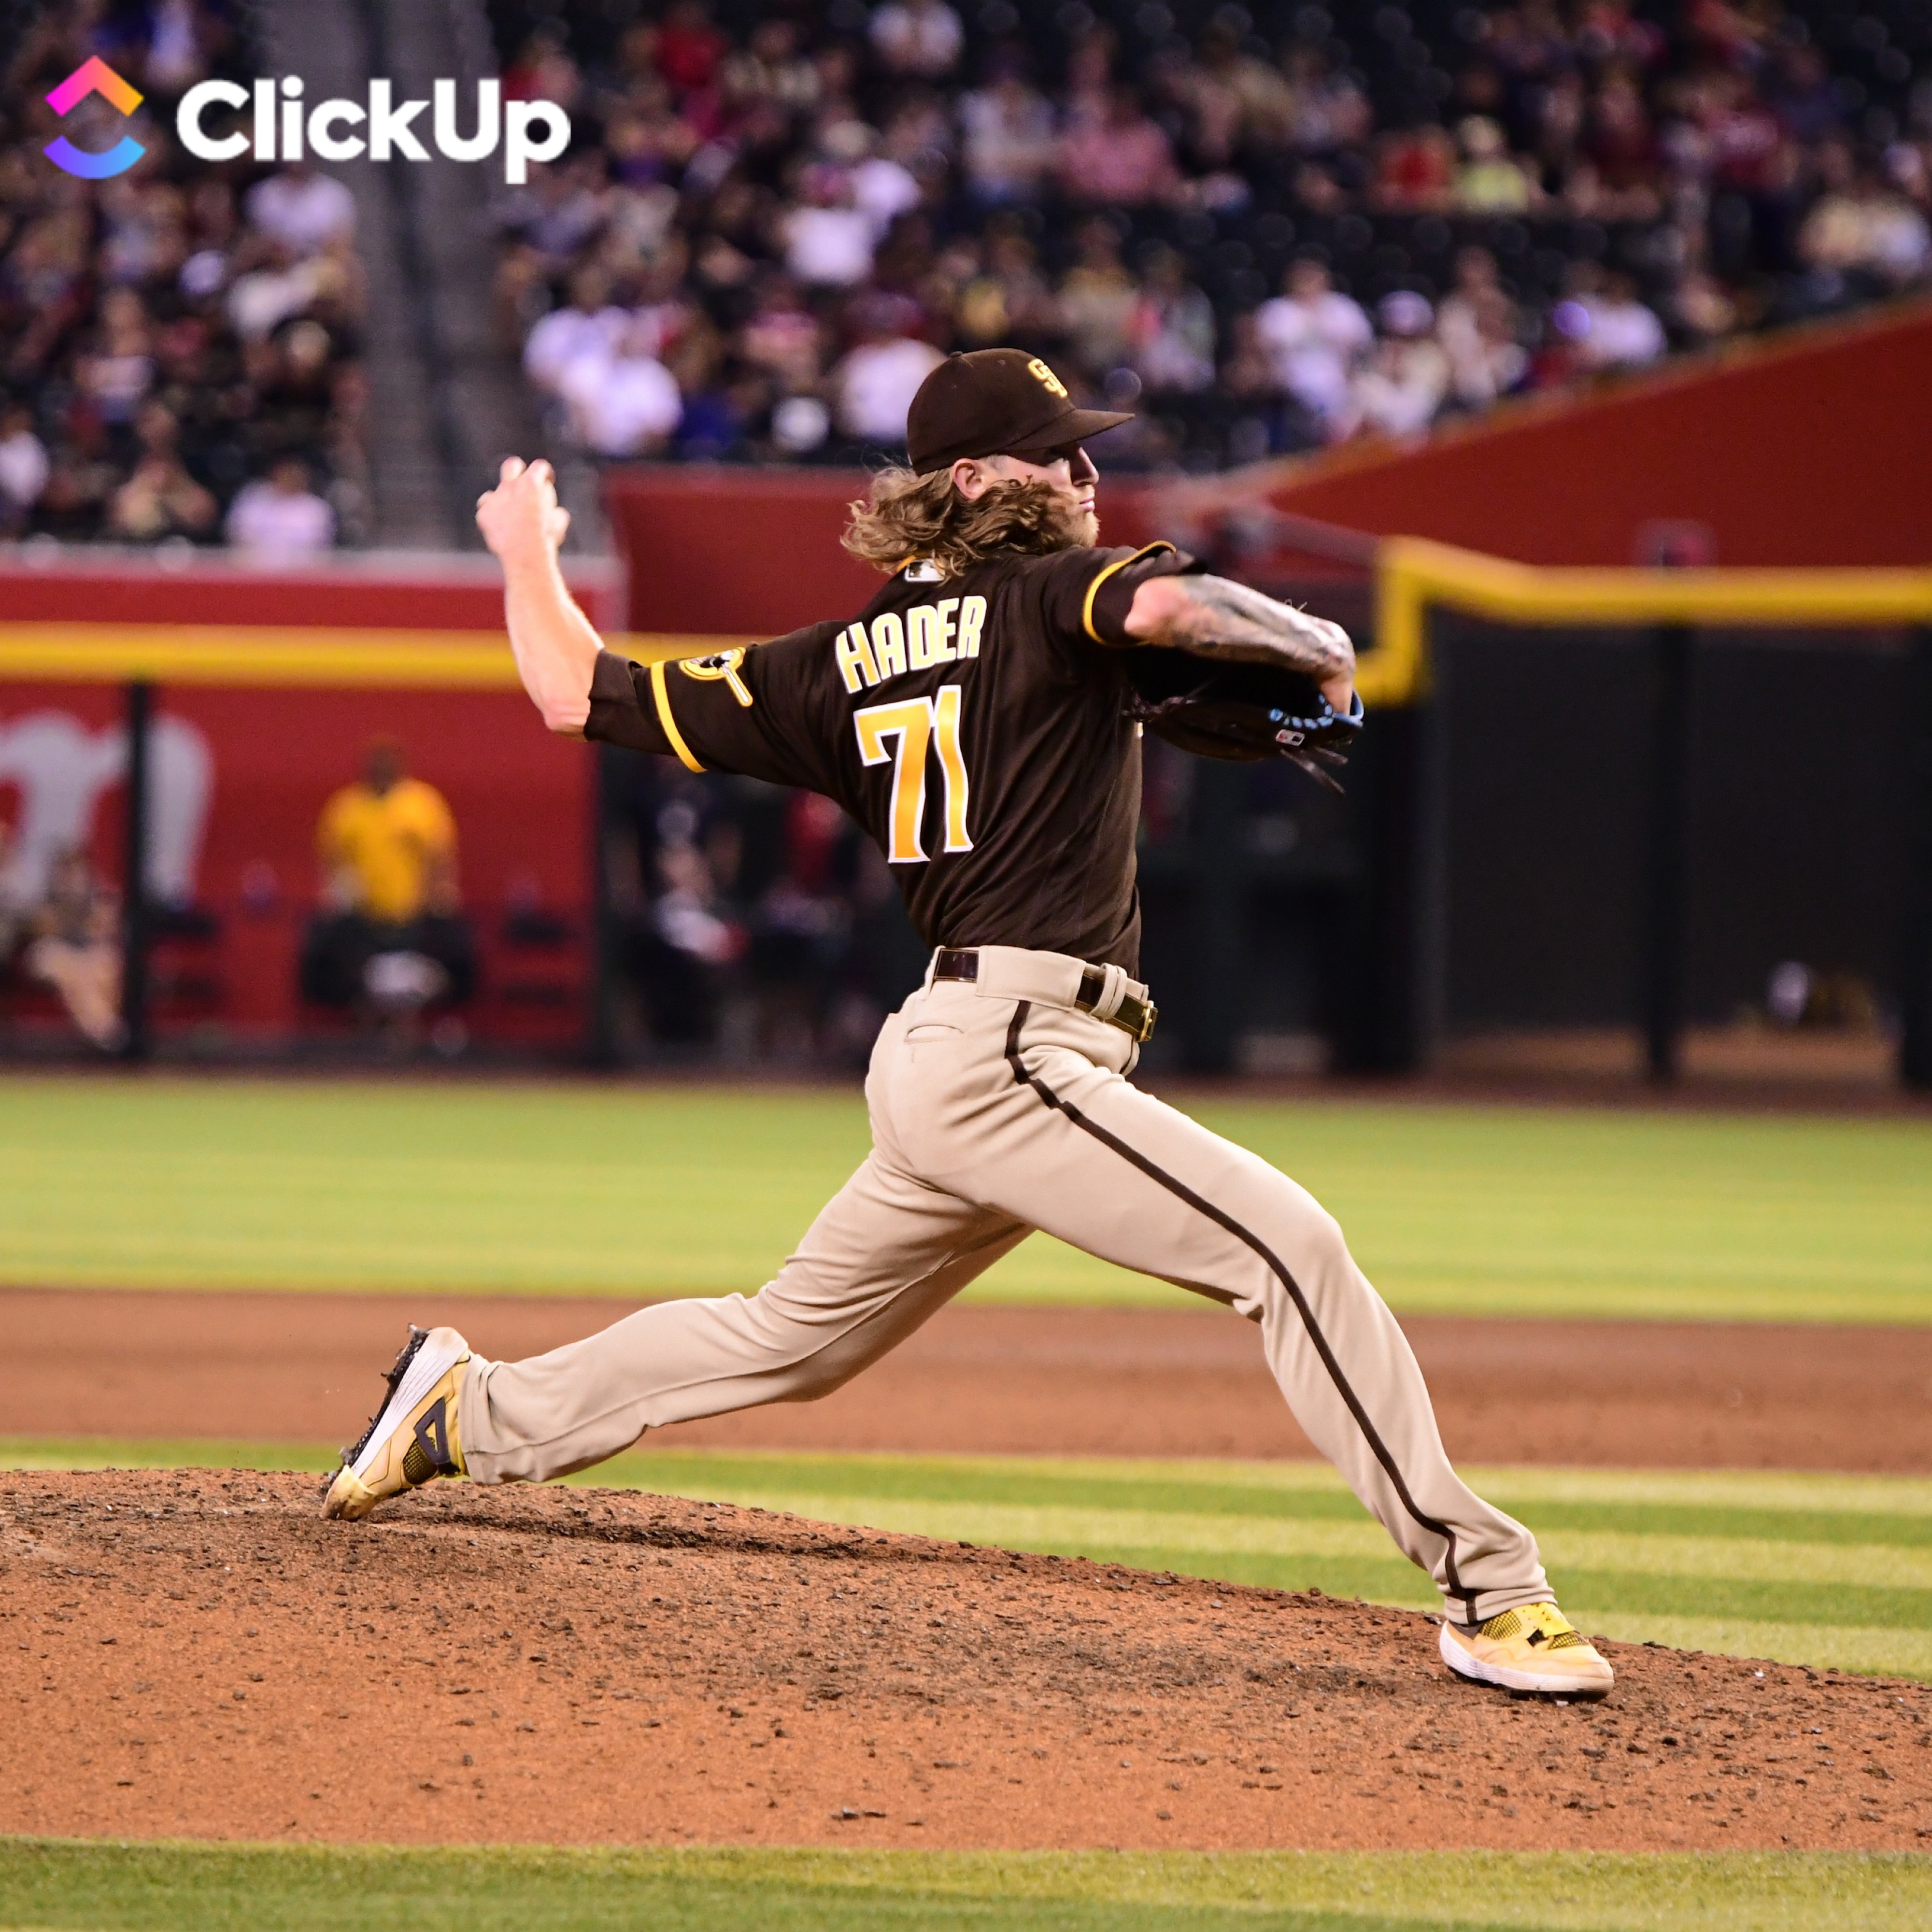 San Diego Padres on X: Josh just stacking up the @clickup saves